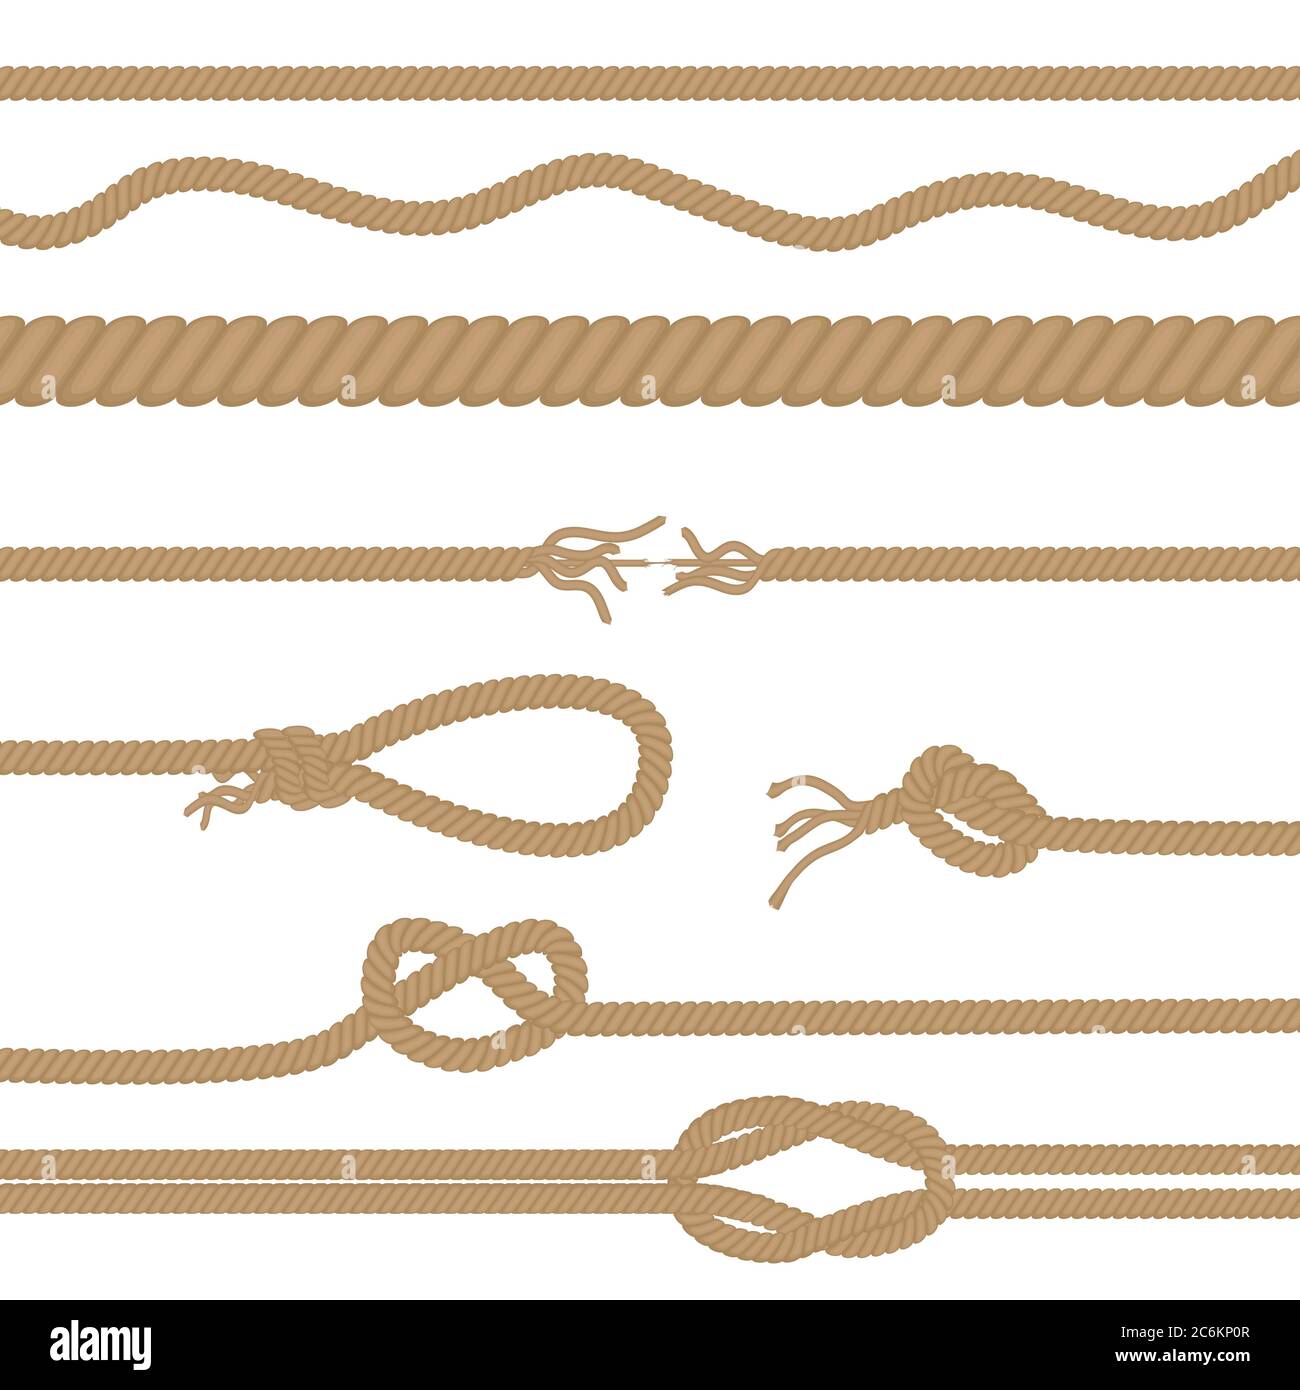 Set of realistic vector brown ropes and knots brushes isolated Stock Vector